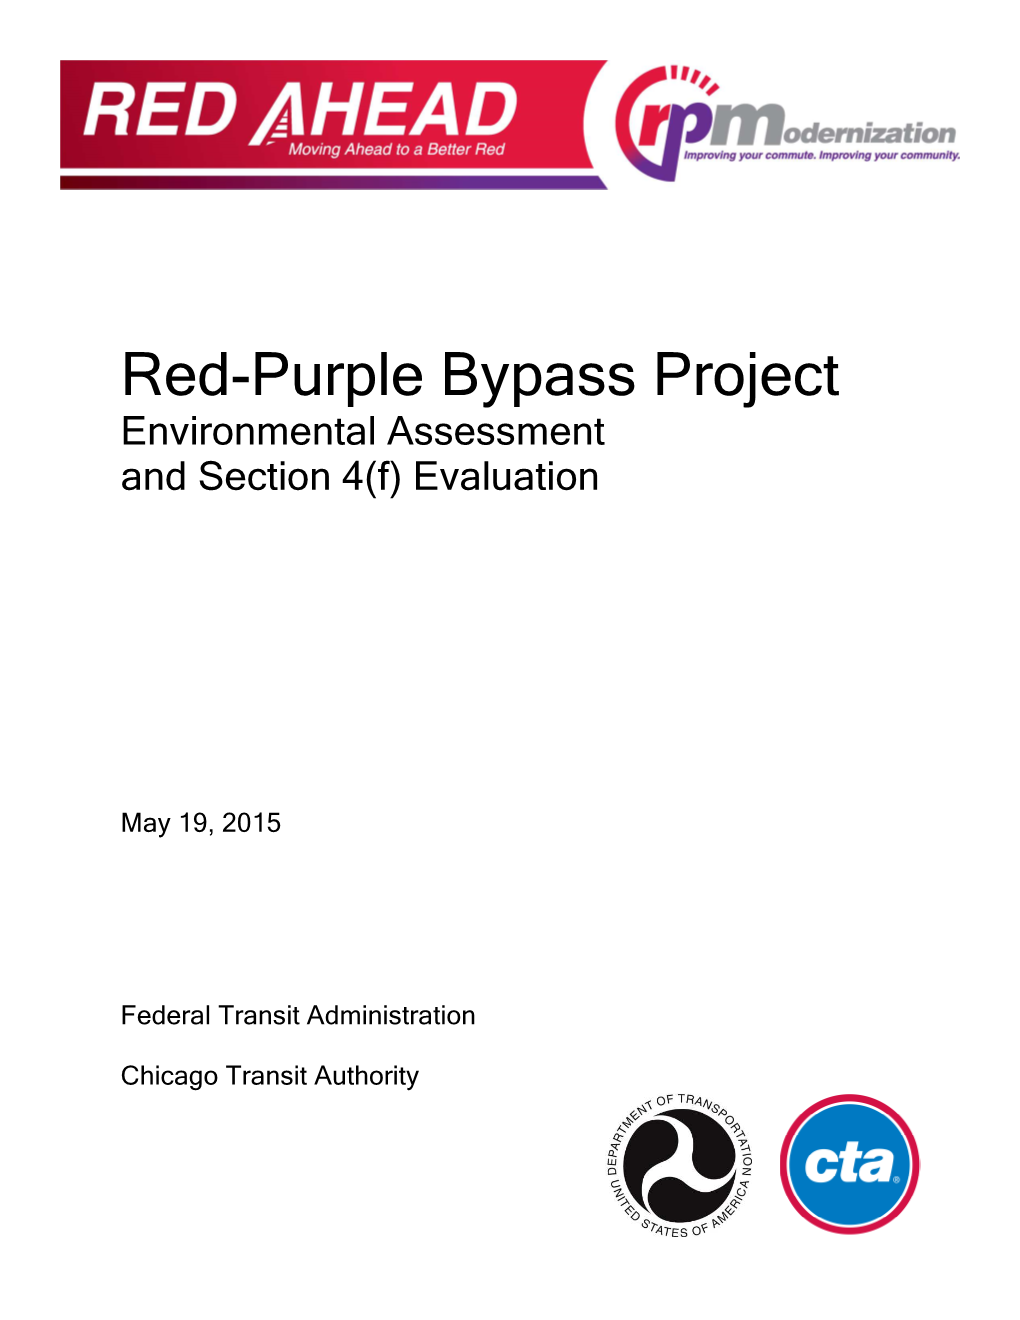 Red-Purple Bypass Project Environmental Assessment and Section 4(F) Evaluation